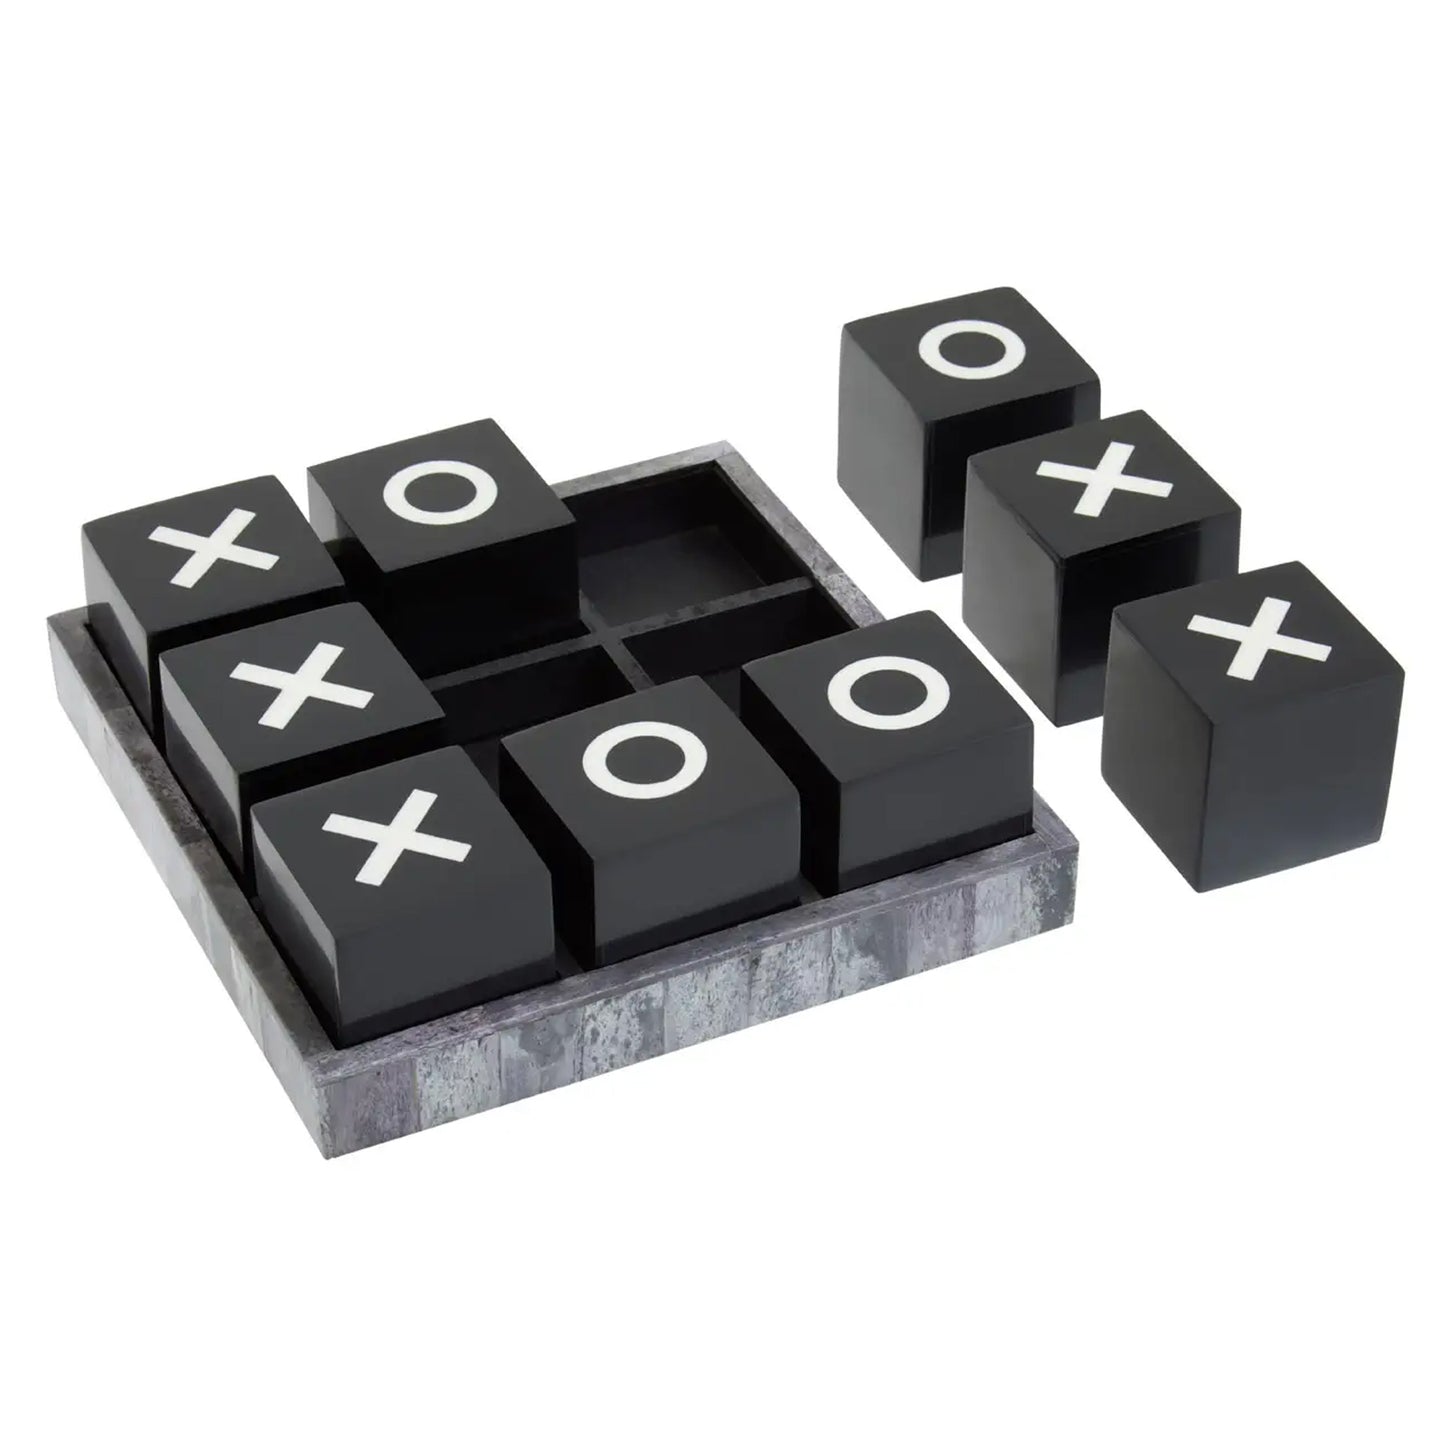 Noughts and Crosses Game Set